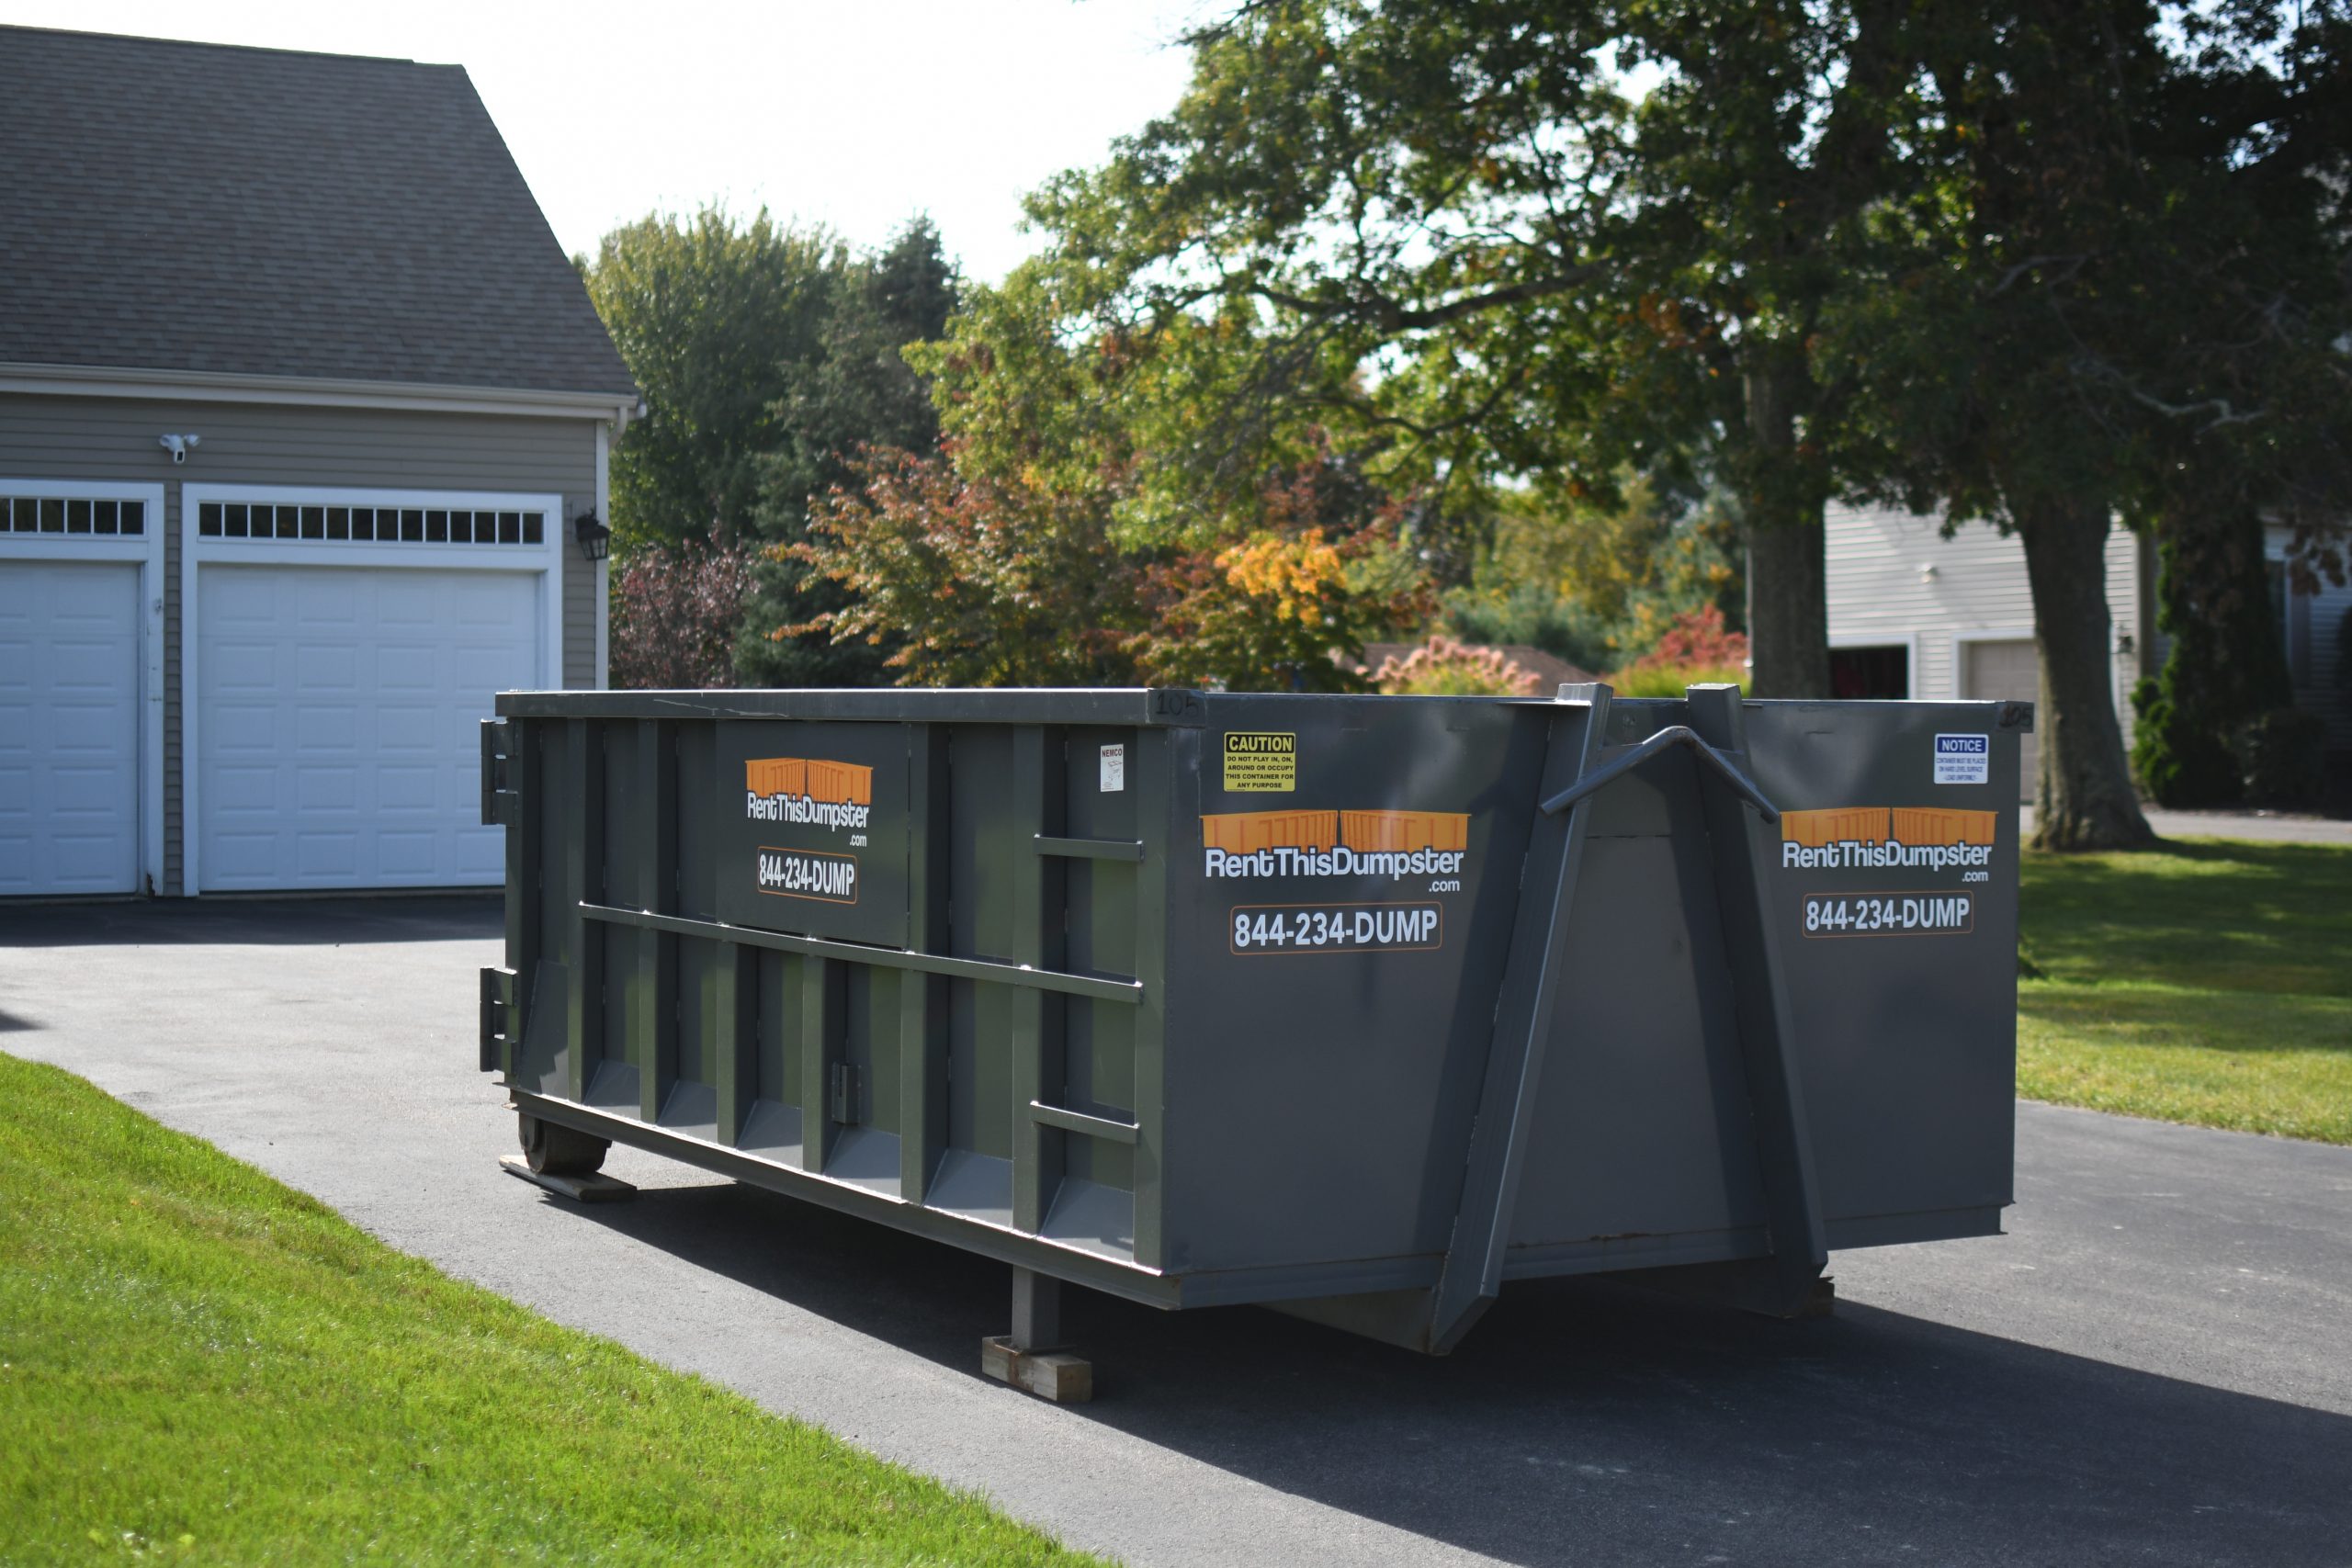 What Size Dumpster Is Rented The Most?